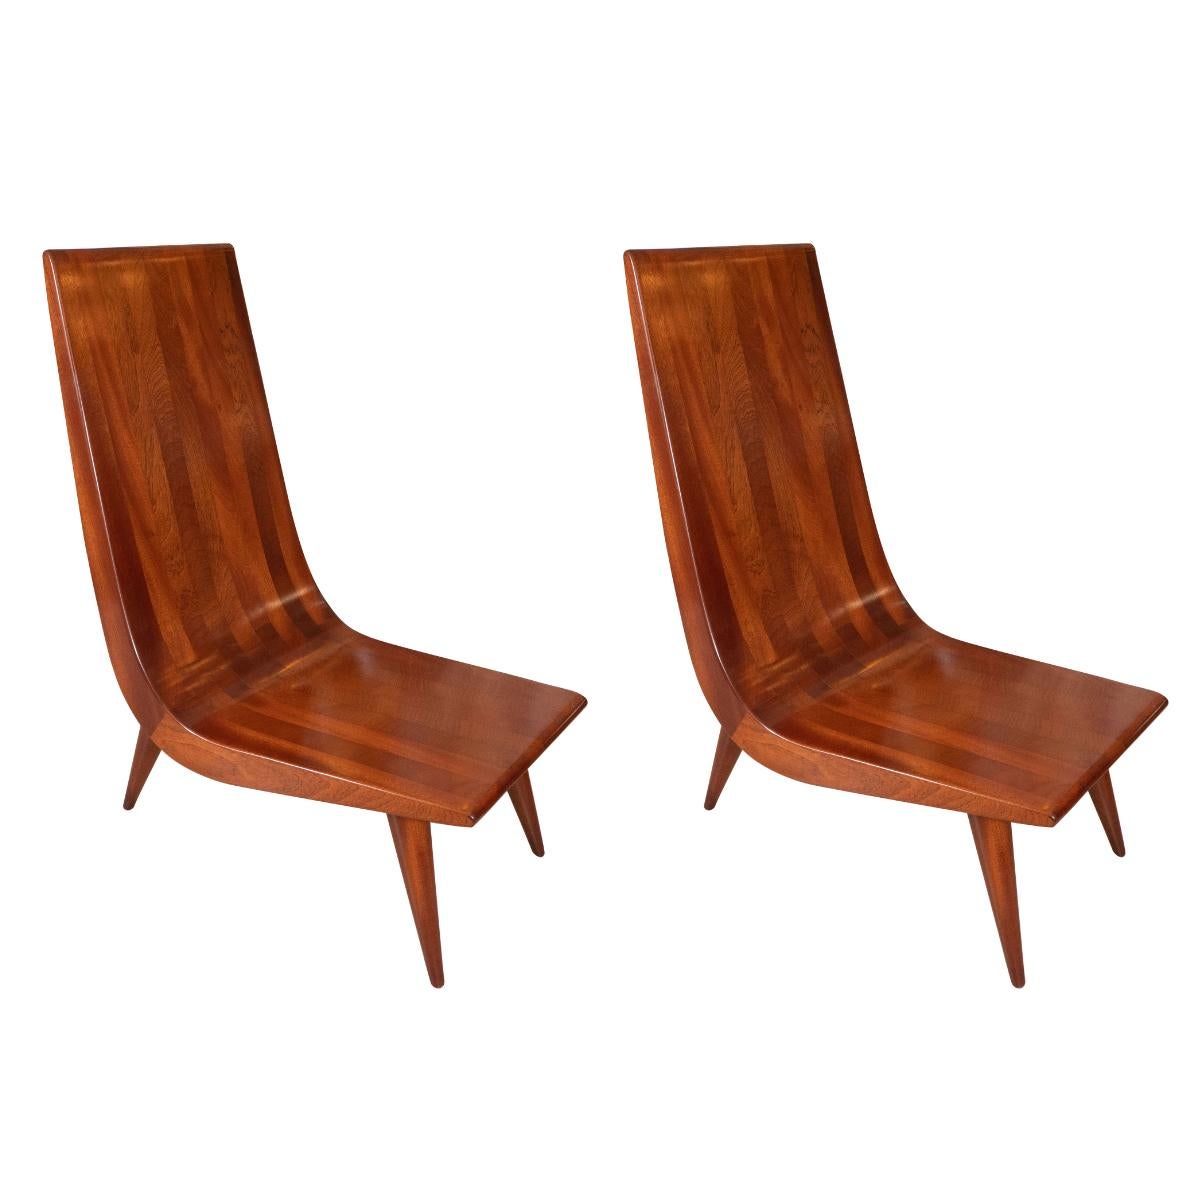 Pair of high back, curvilinear African mahogany slipper chairs by Carlos Da COSTA.